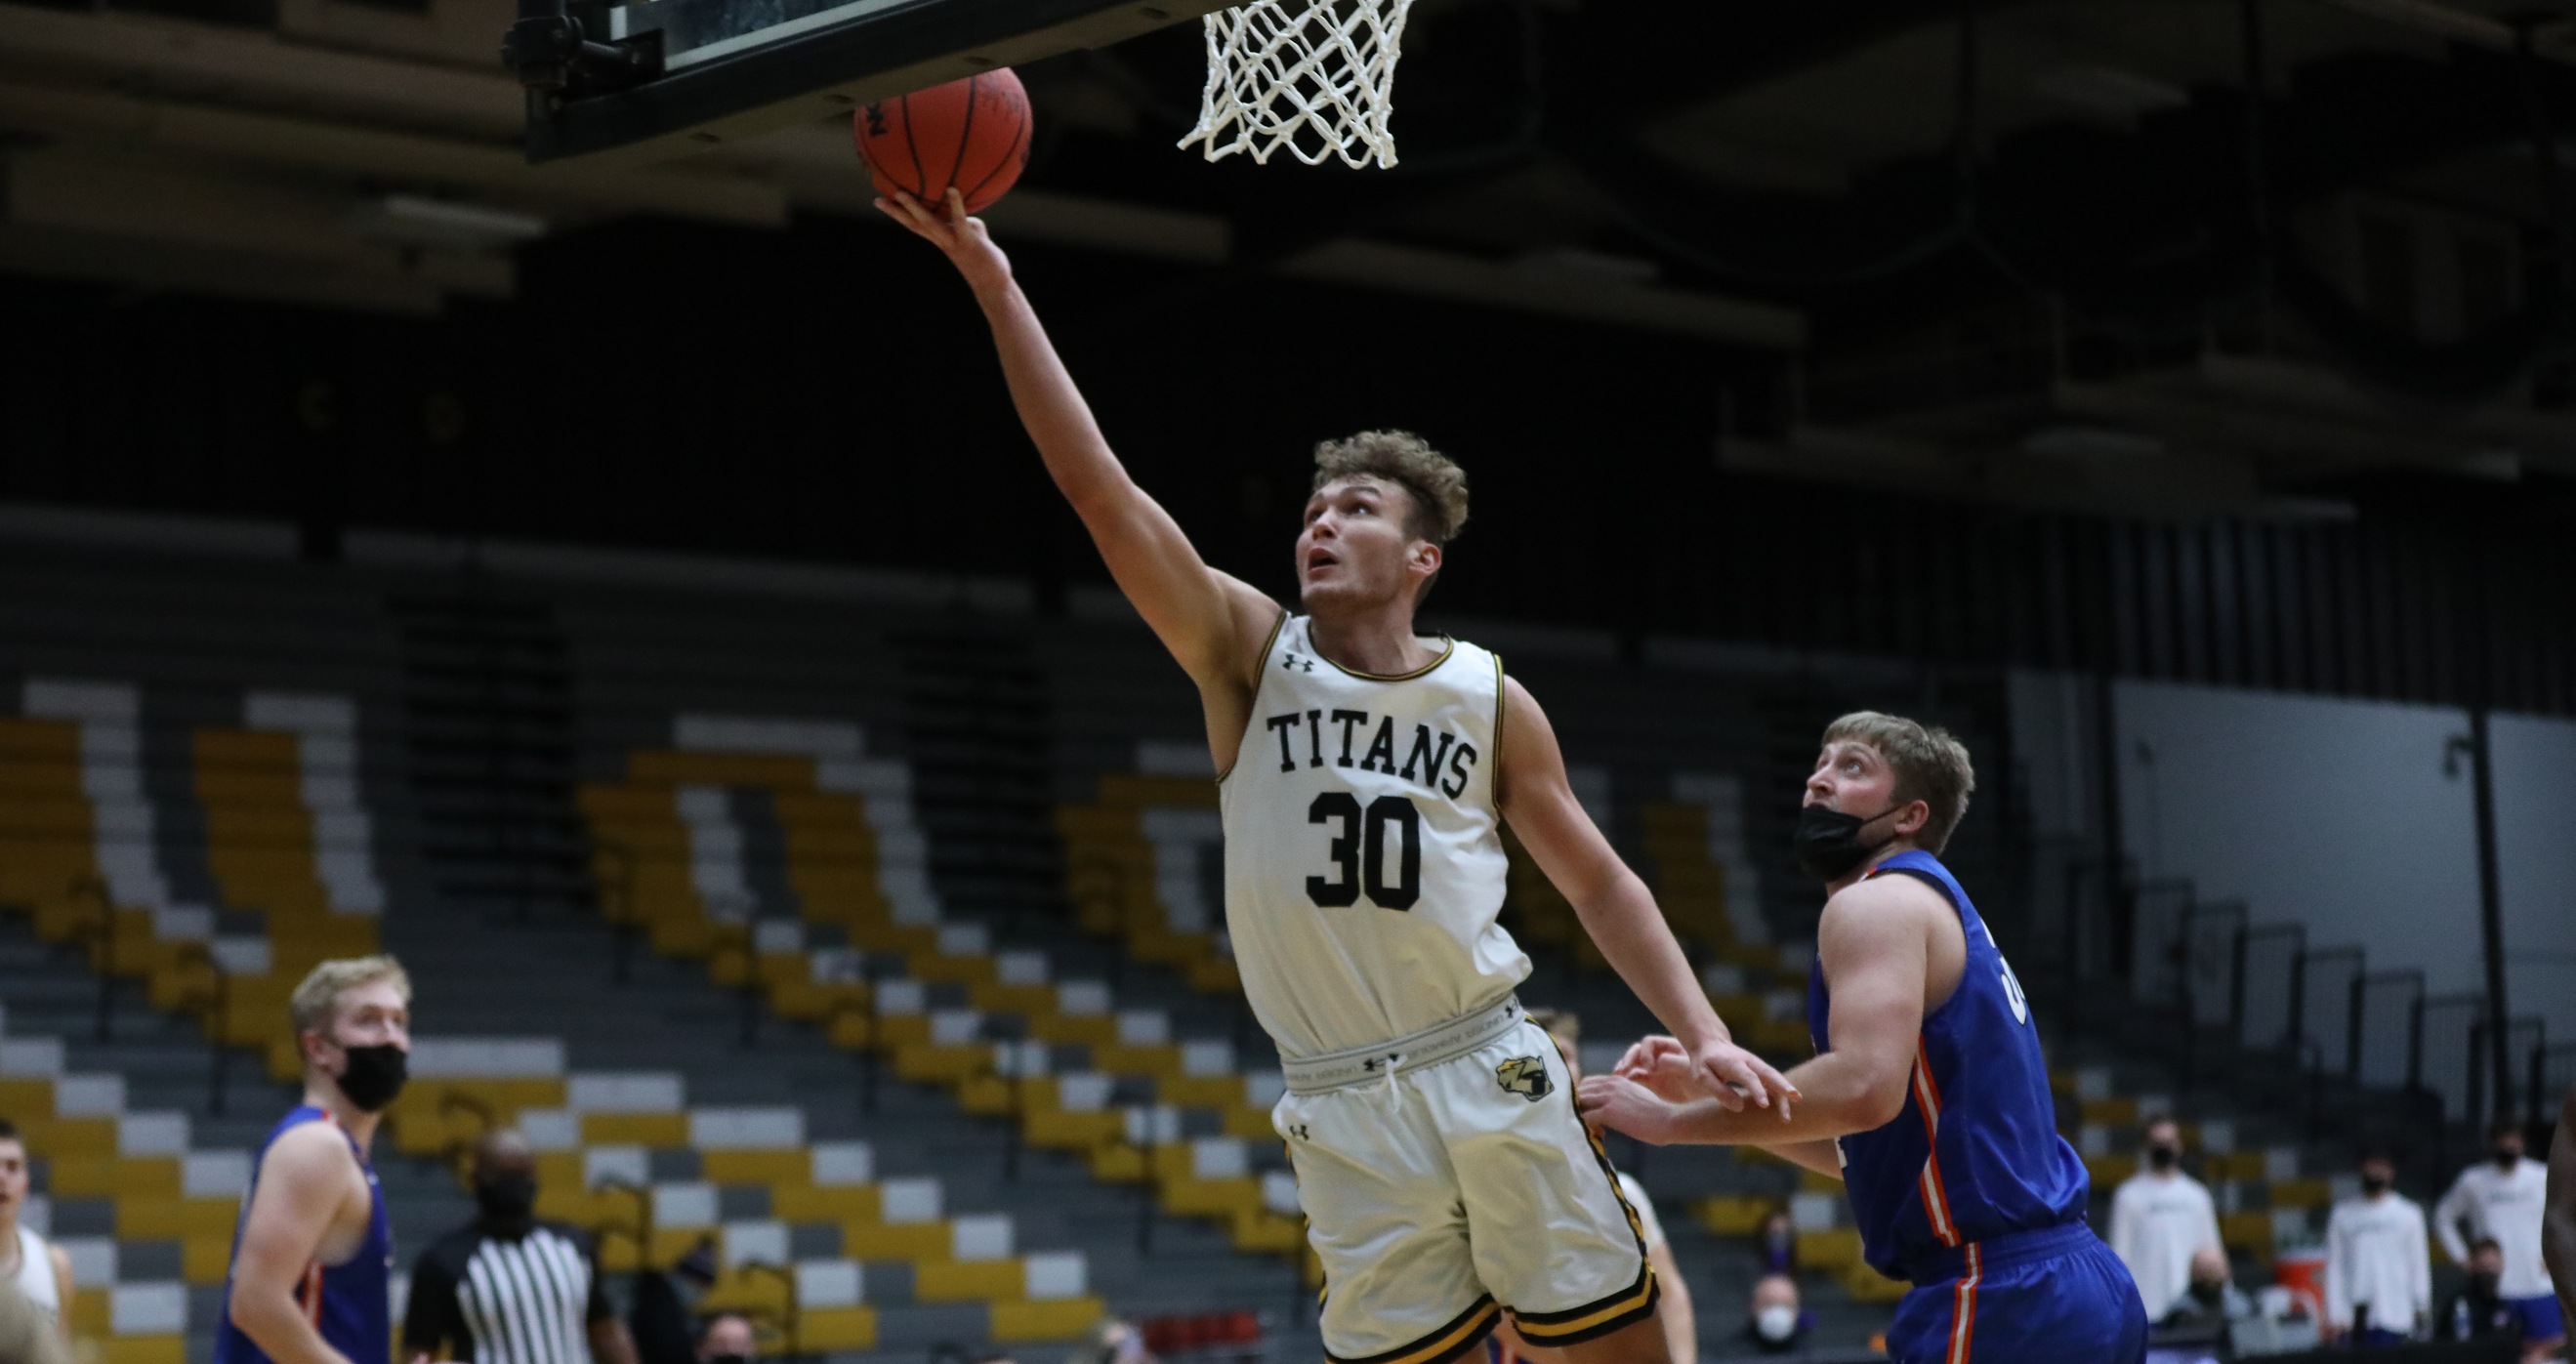 Levi Borchert has totaled 44 points and 44 rebounds during the Titans' last three games.